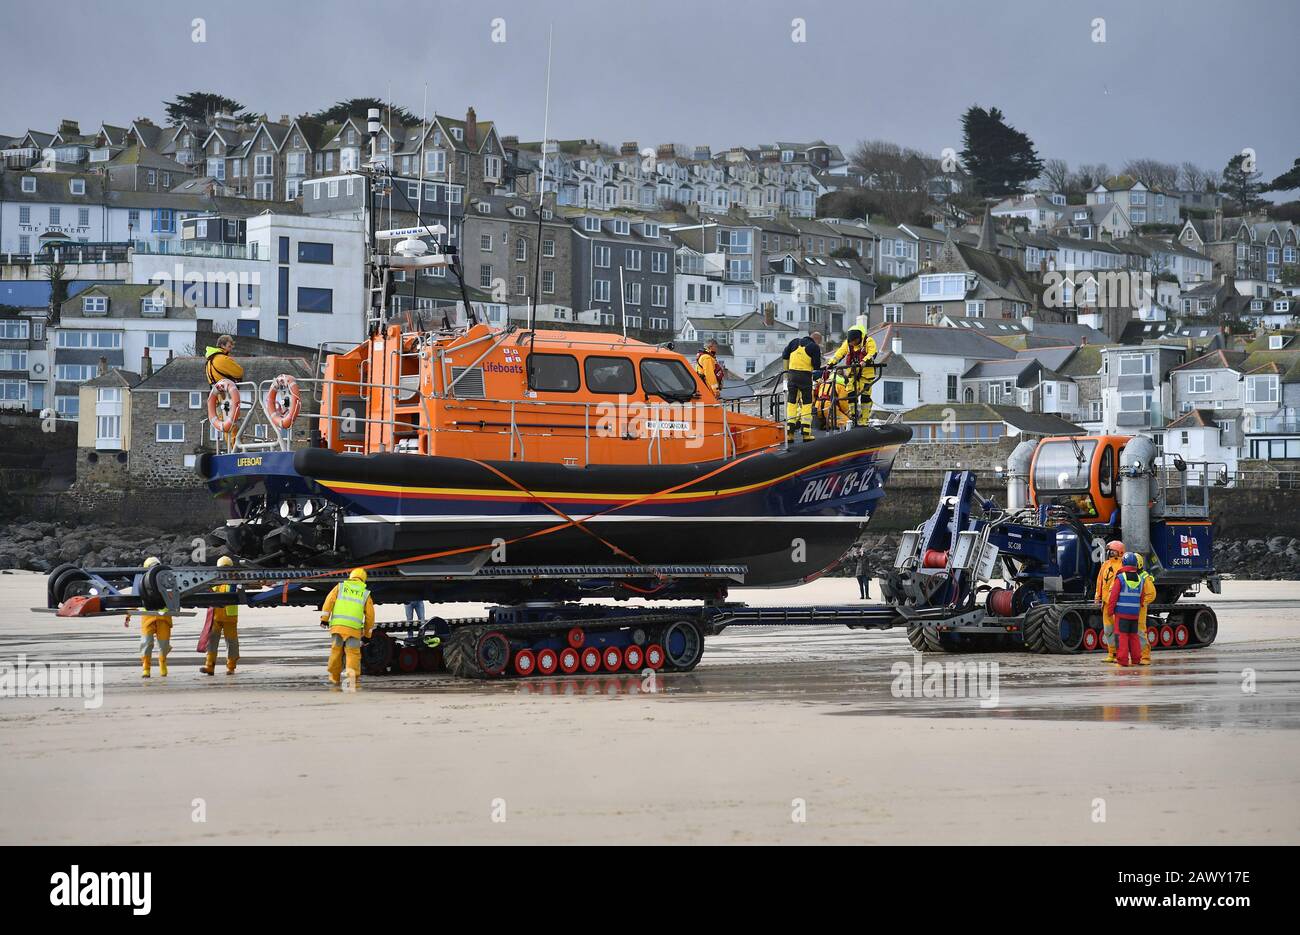 An RNLI boat is brought ashore at St Ives, The Met Office have said that 'a spell of very strong winds,' with gusts of 60-70mph, is expected across southern England on Monday, bringing likely delays to road, rail, air and ferry transport. Stock Photo